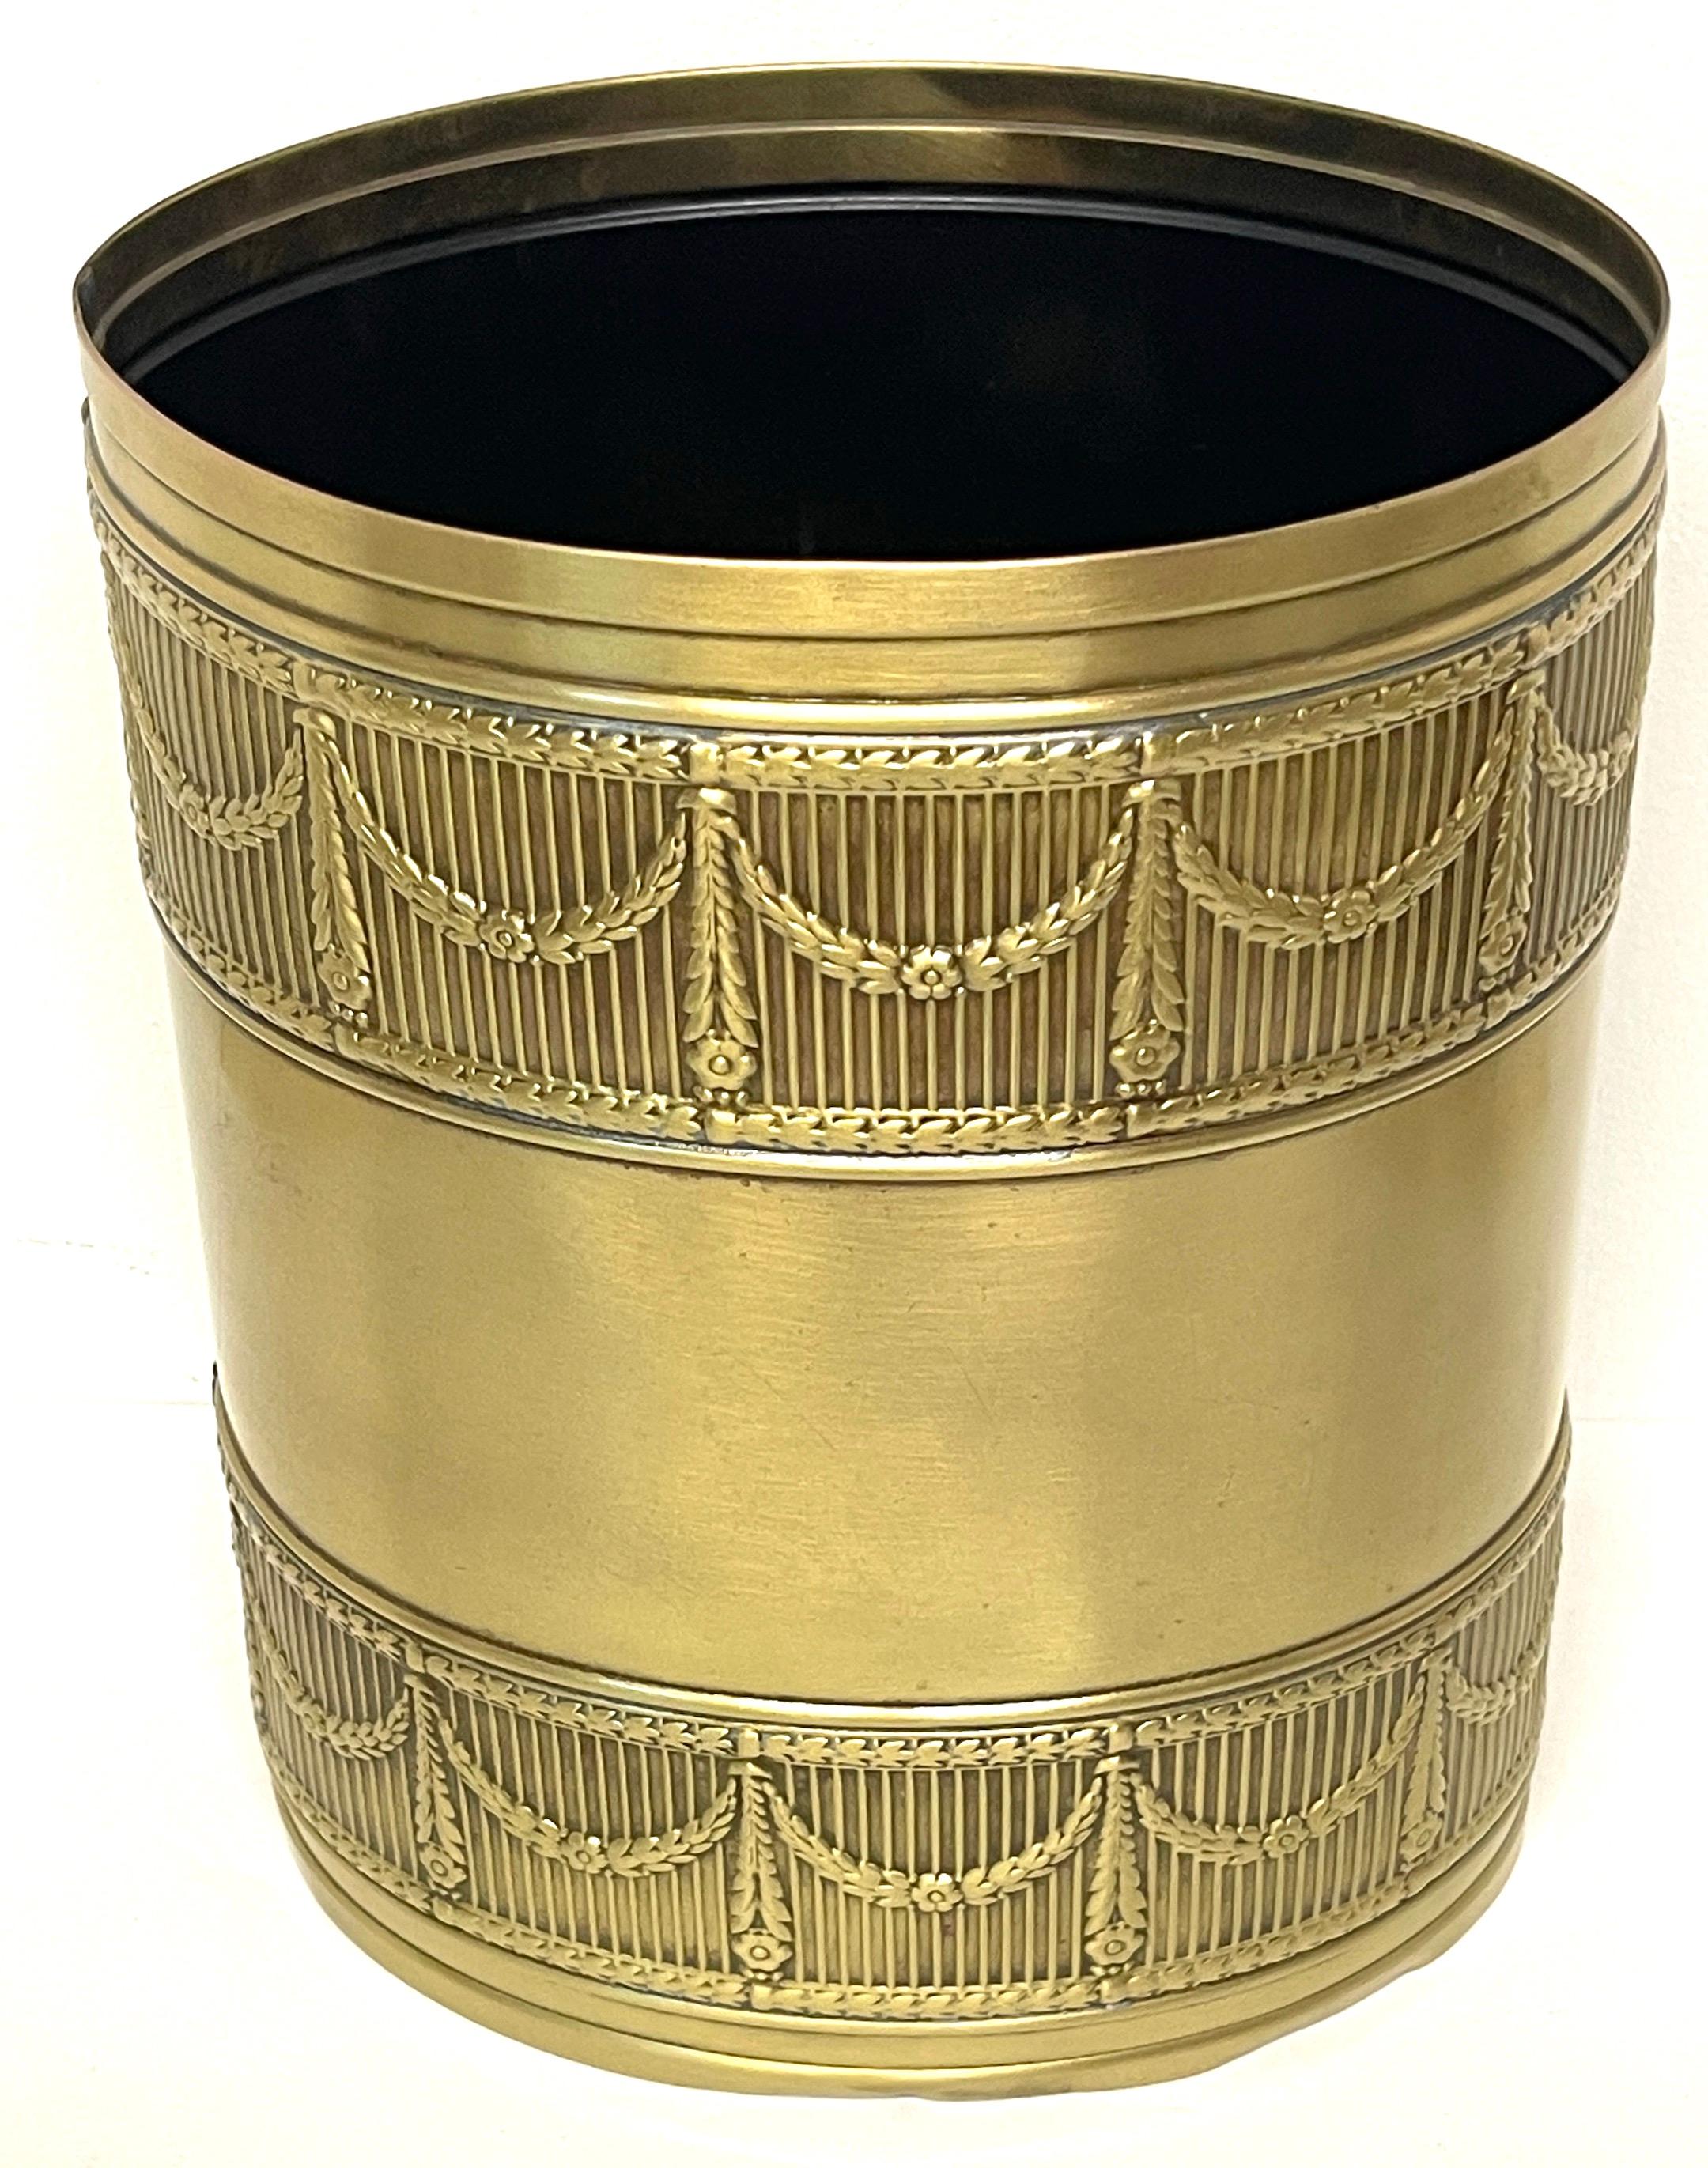 20th Century Austrian Bronze & Iron Neoclassical Trash Can / Wastepaper Basket For Sale